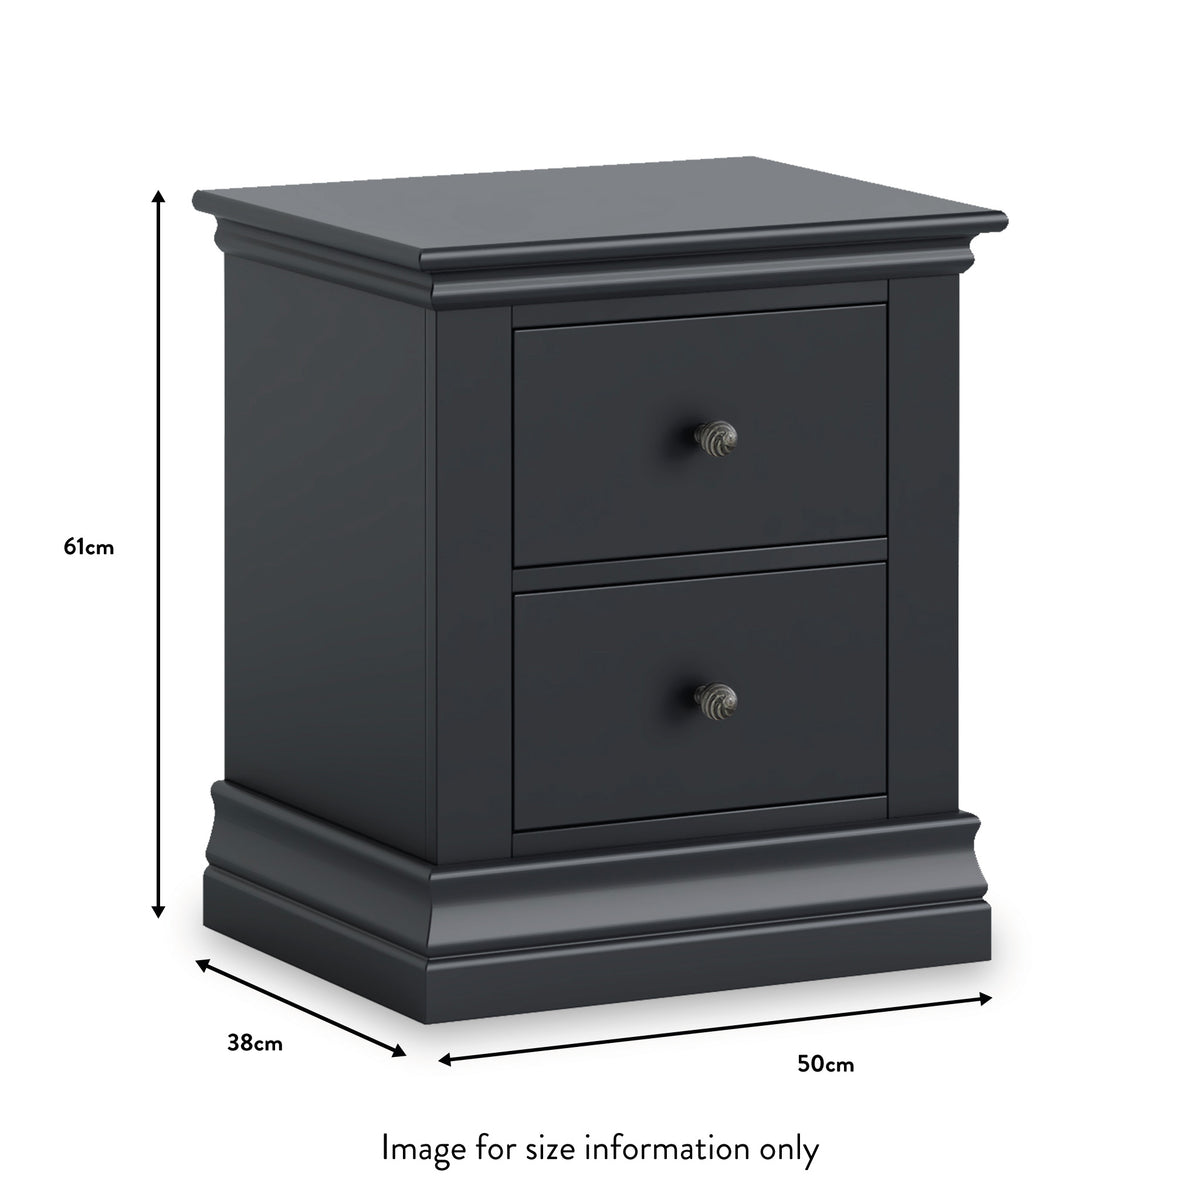 Porter Charcoal 2 Drawer Bedside Table dimensions